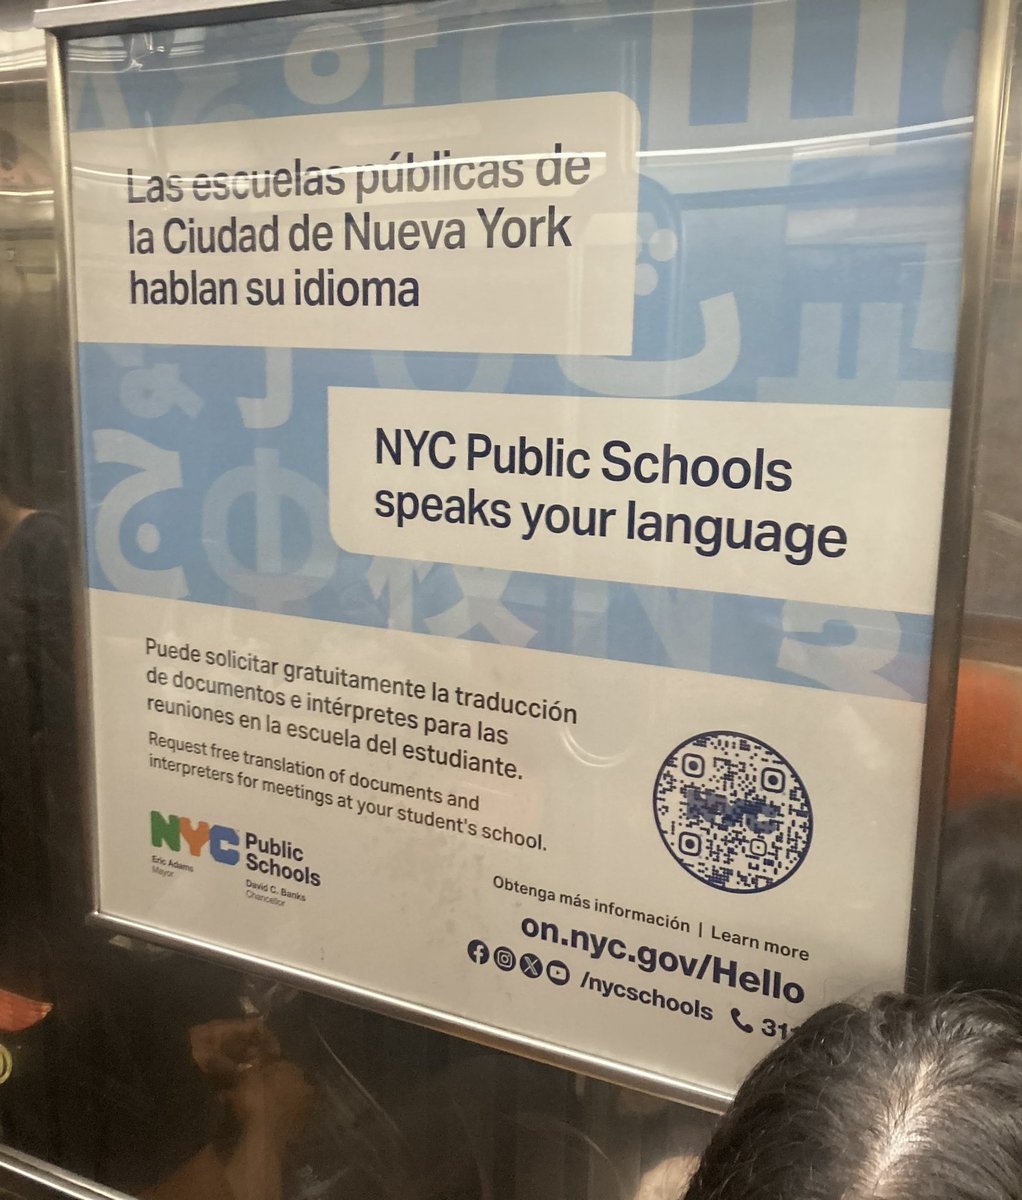 How come the NYC public schools can manage subject/verb agreement in Spanish but not in English? @DOEChancellor @NYCSchools “We speaks your language!”